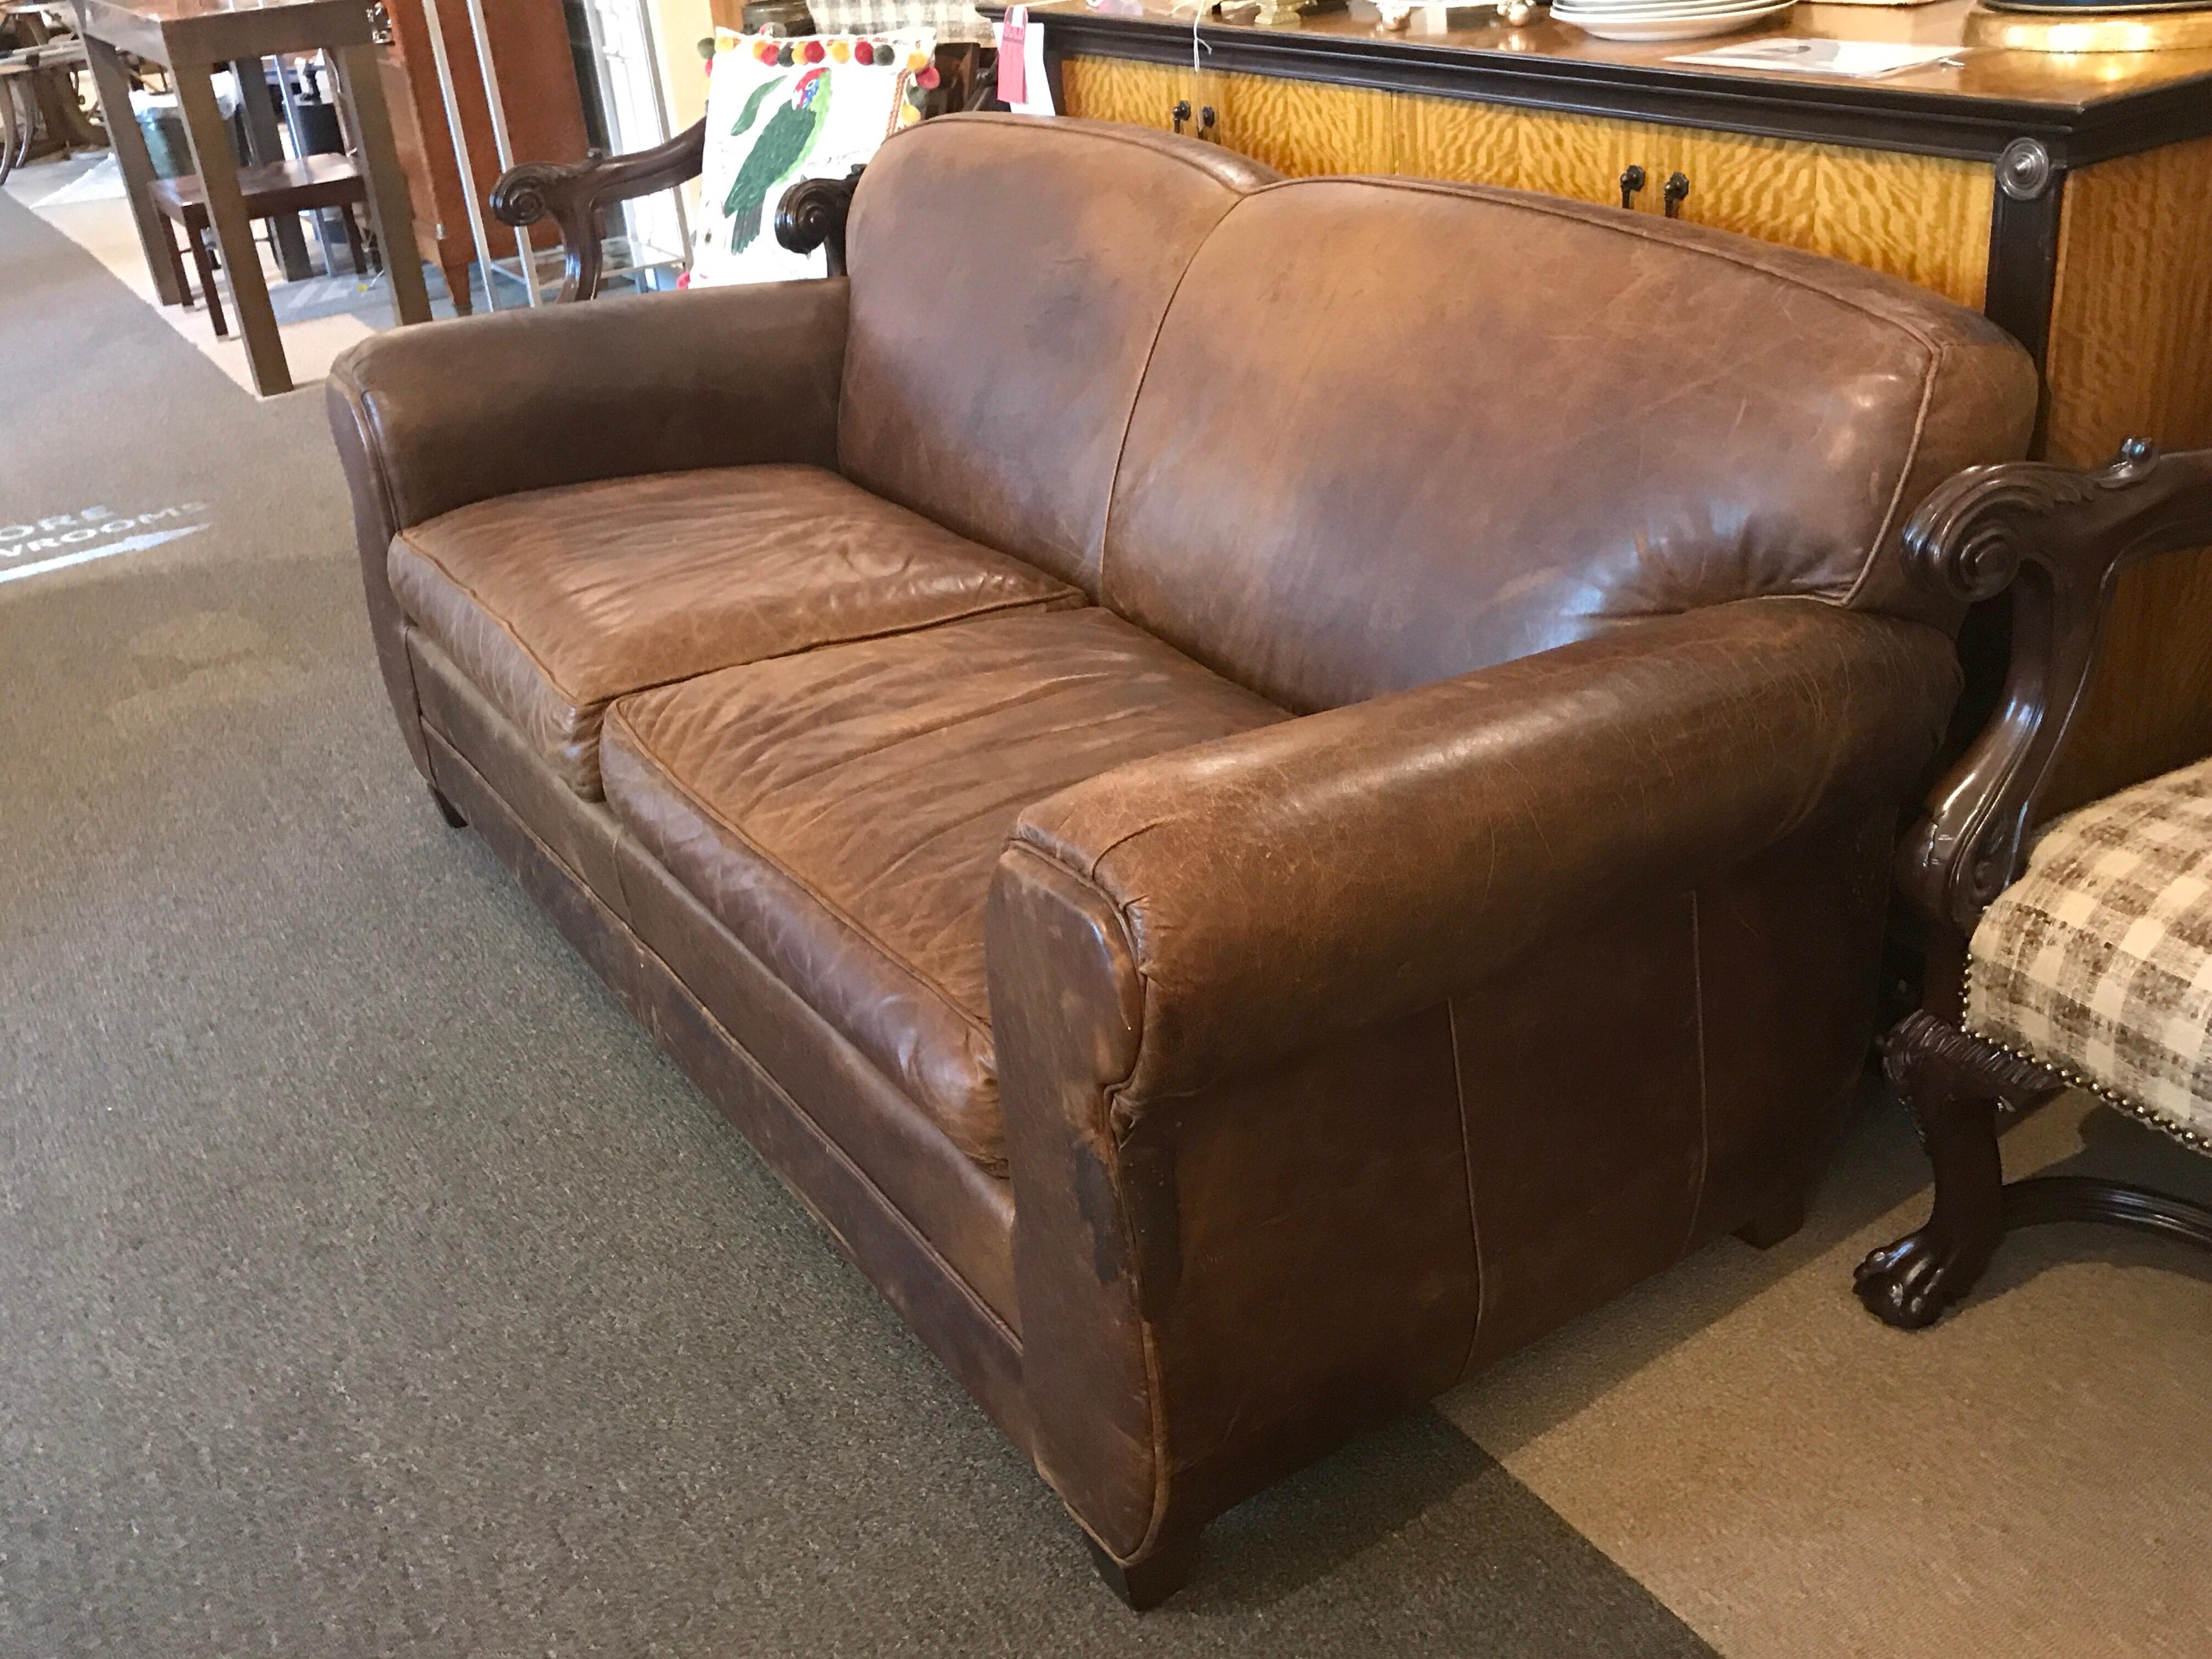 French Art Deco Style Distressed Leather Sofa In Distressed Condition For Sale In Atlanta, GA